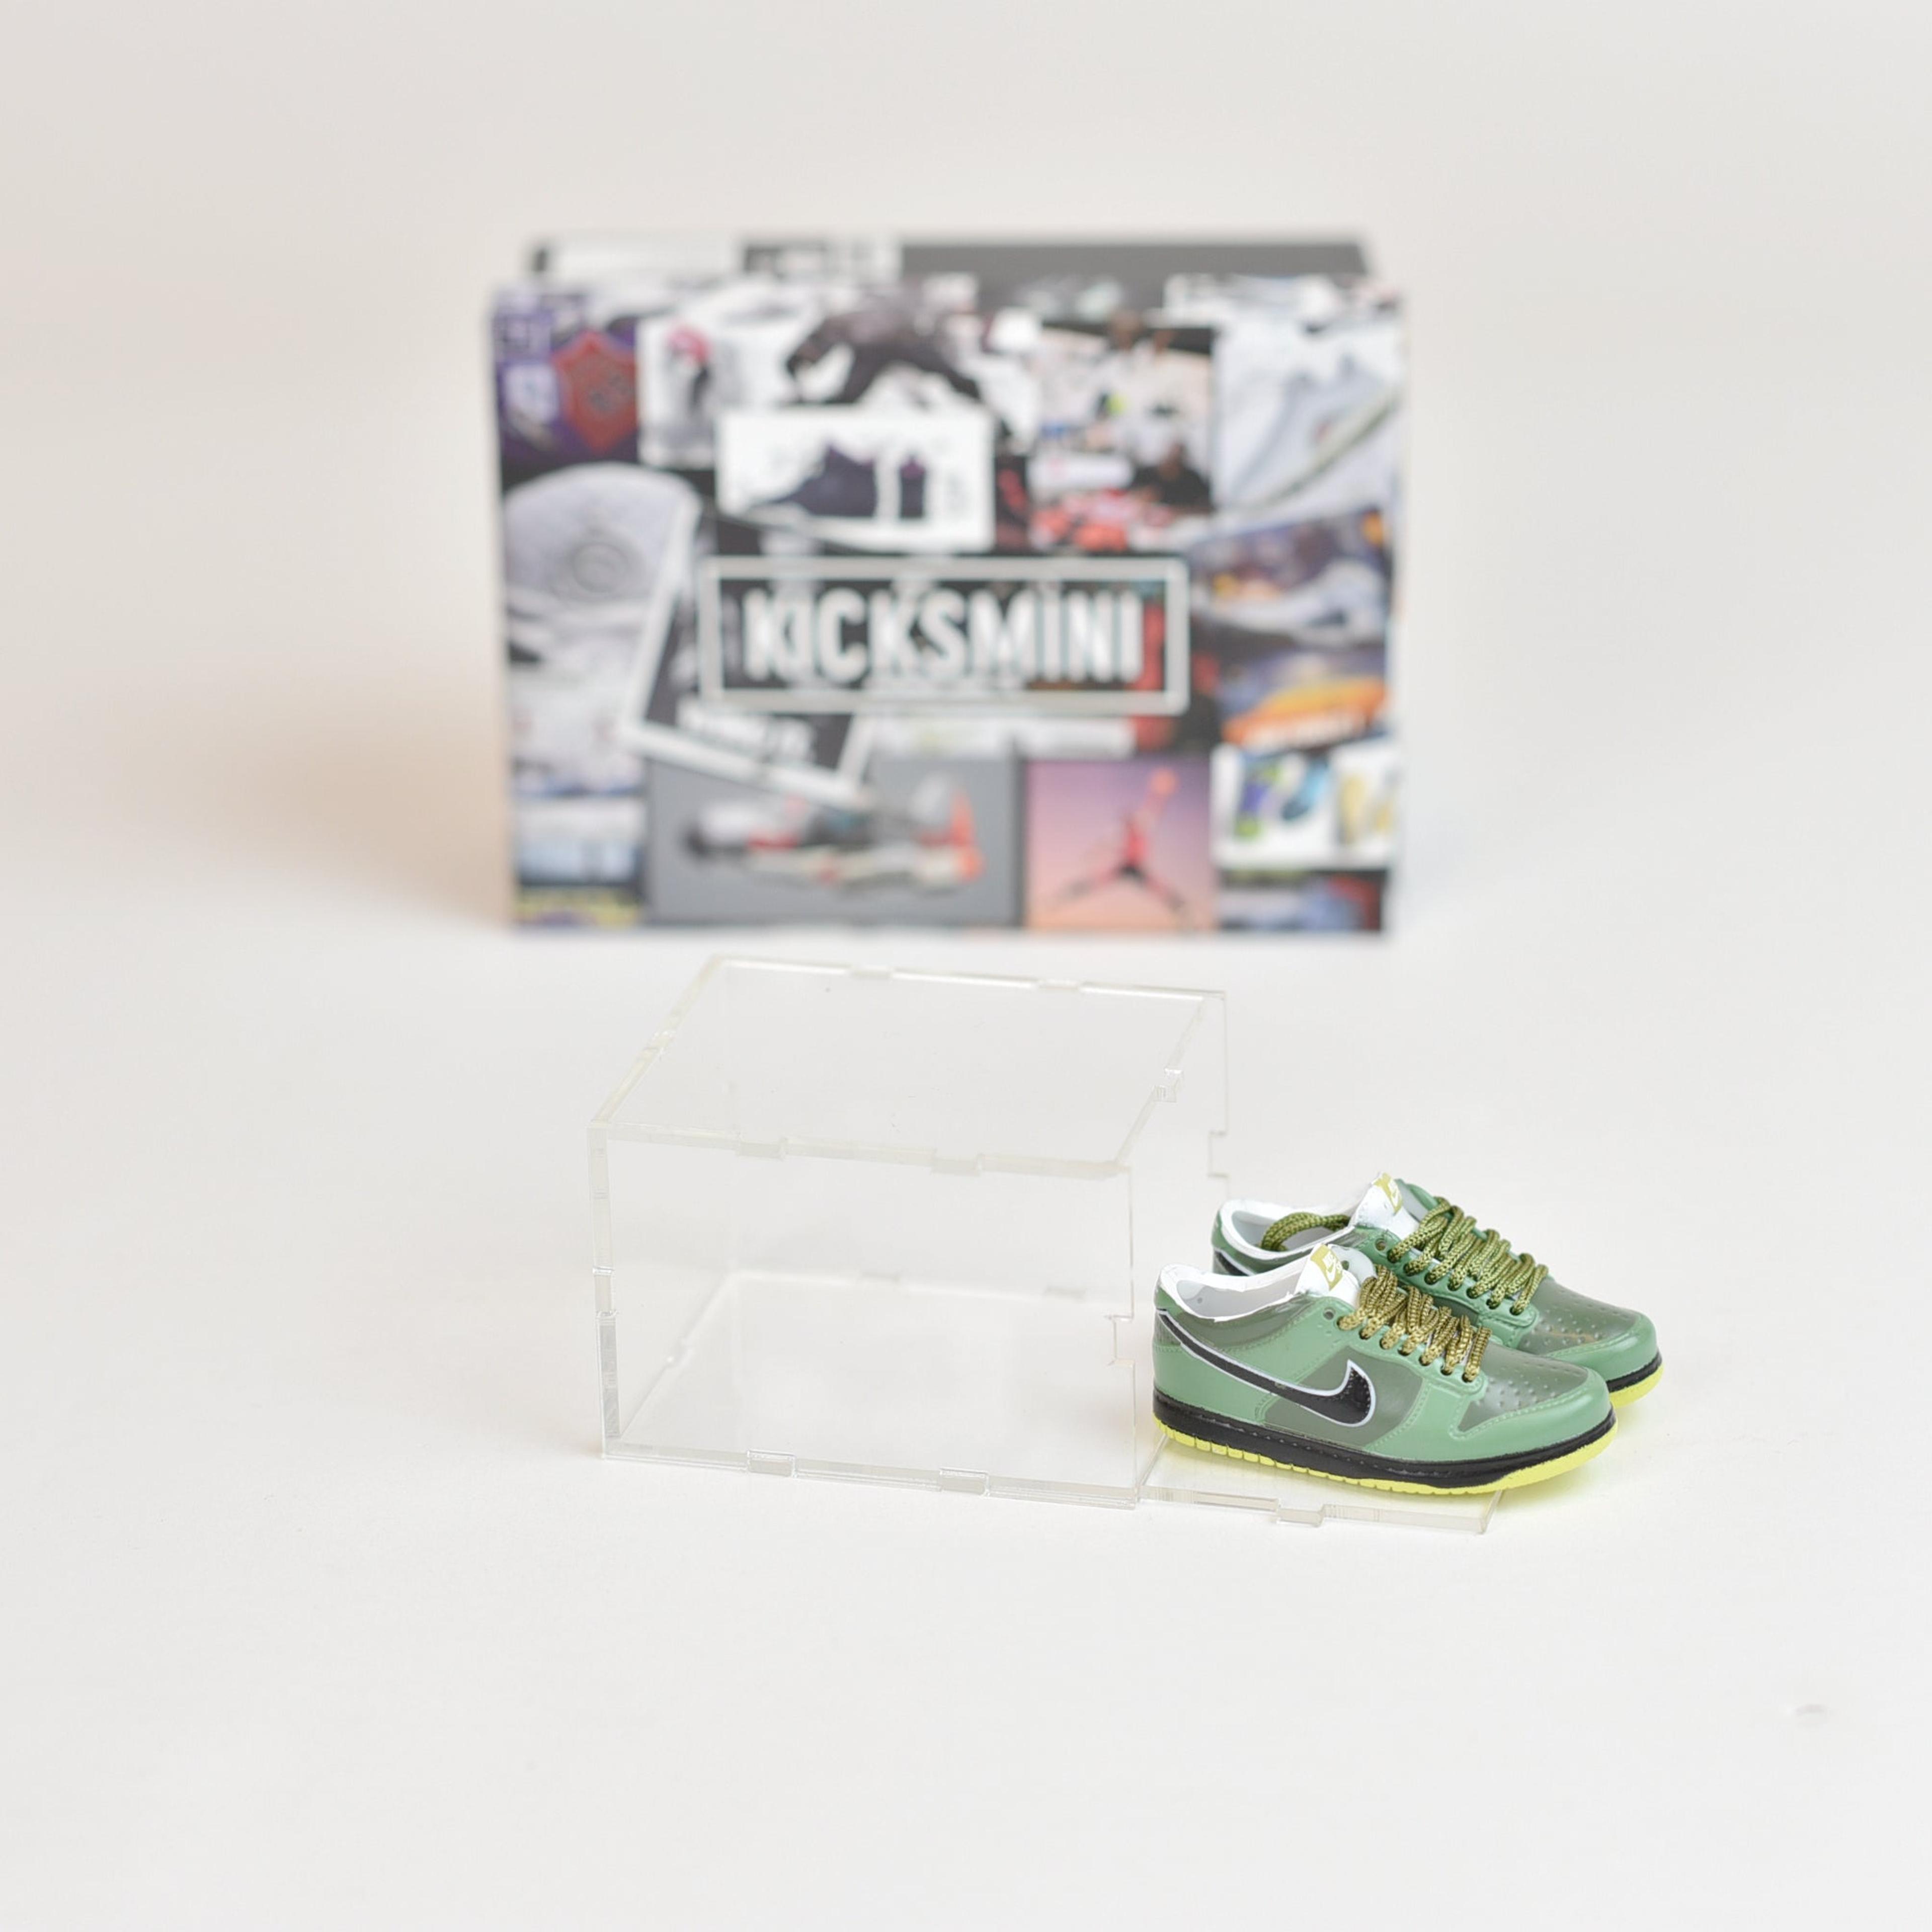 Alternate View 10 of SB Dunk Low Collaboration Mini Sneakers with Display Case